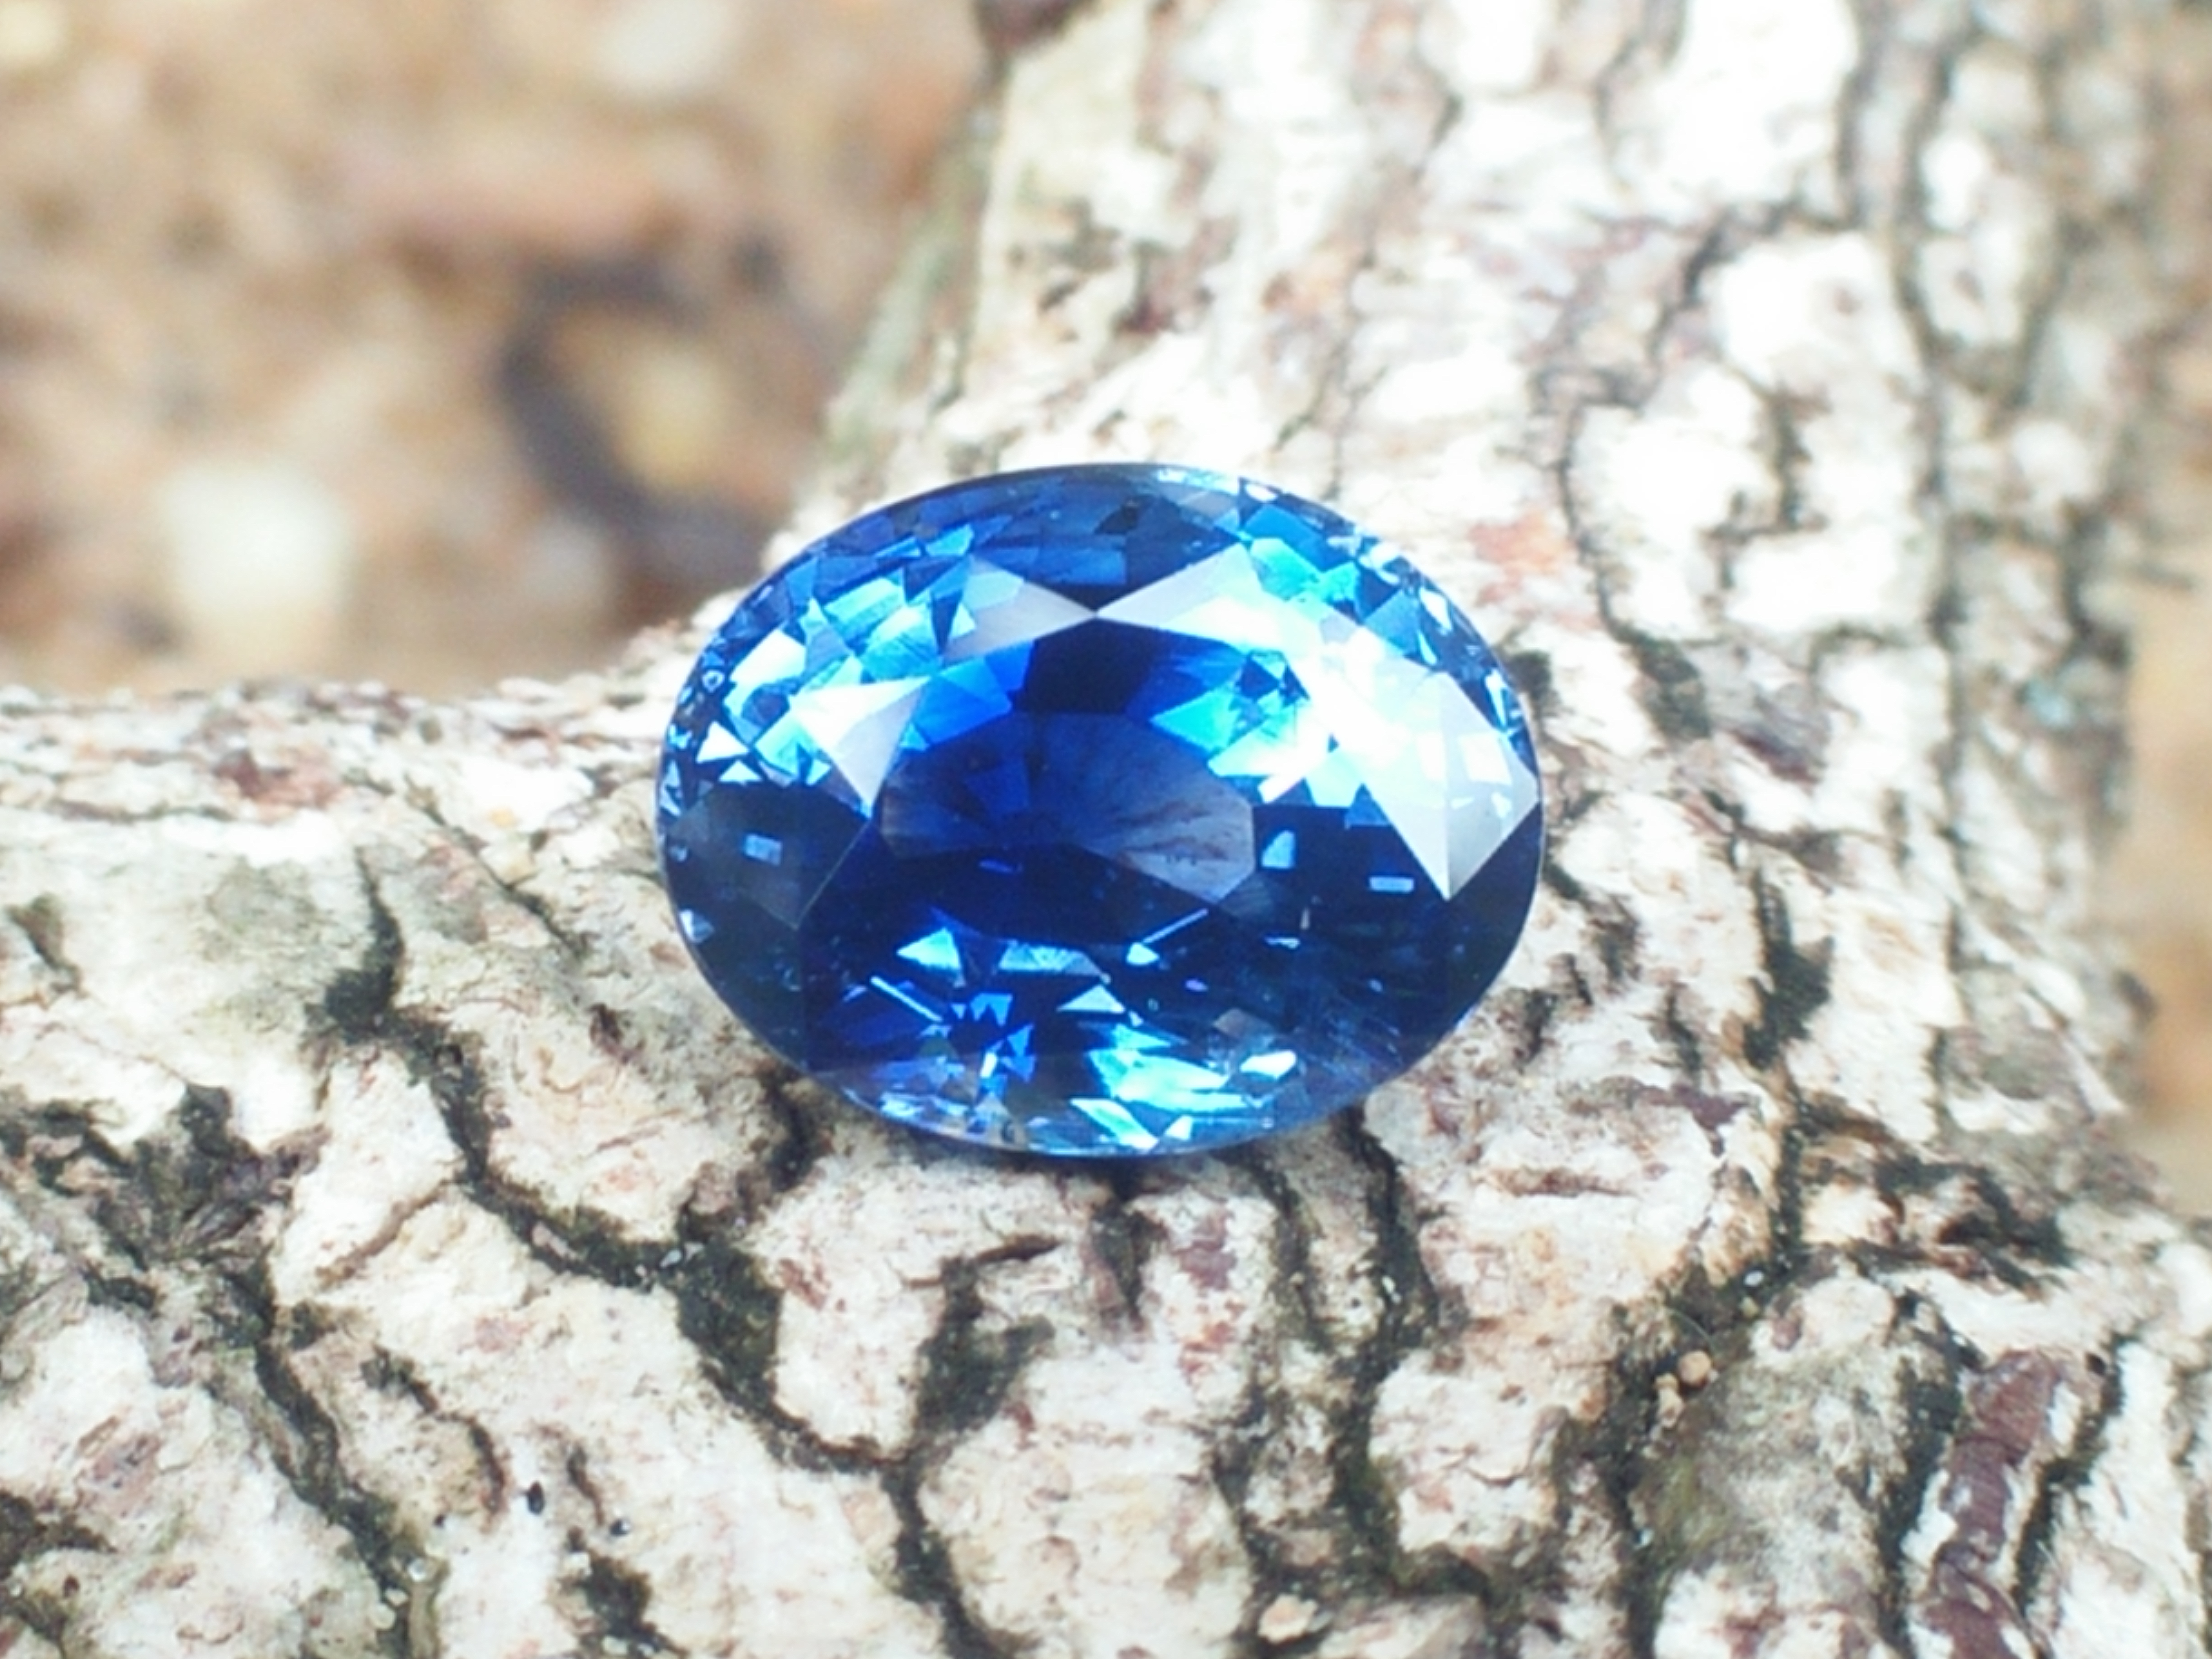 NATURAL BLUE SAPPHIRE Shape : Ovel Dimension : 9.15mm x 7.30mm x 5.51mm Weight : 3.06Cts Clarity : SI Colour : Cornflower Blue Transparency : Transparent Treatment : Unheated/Natural Sapphire is the birthstone for September